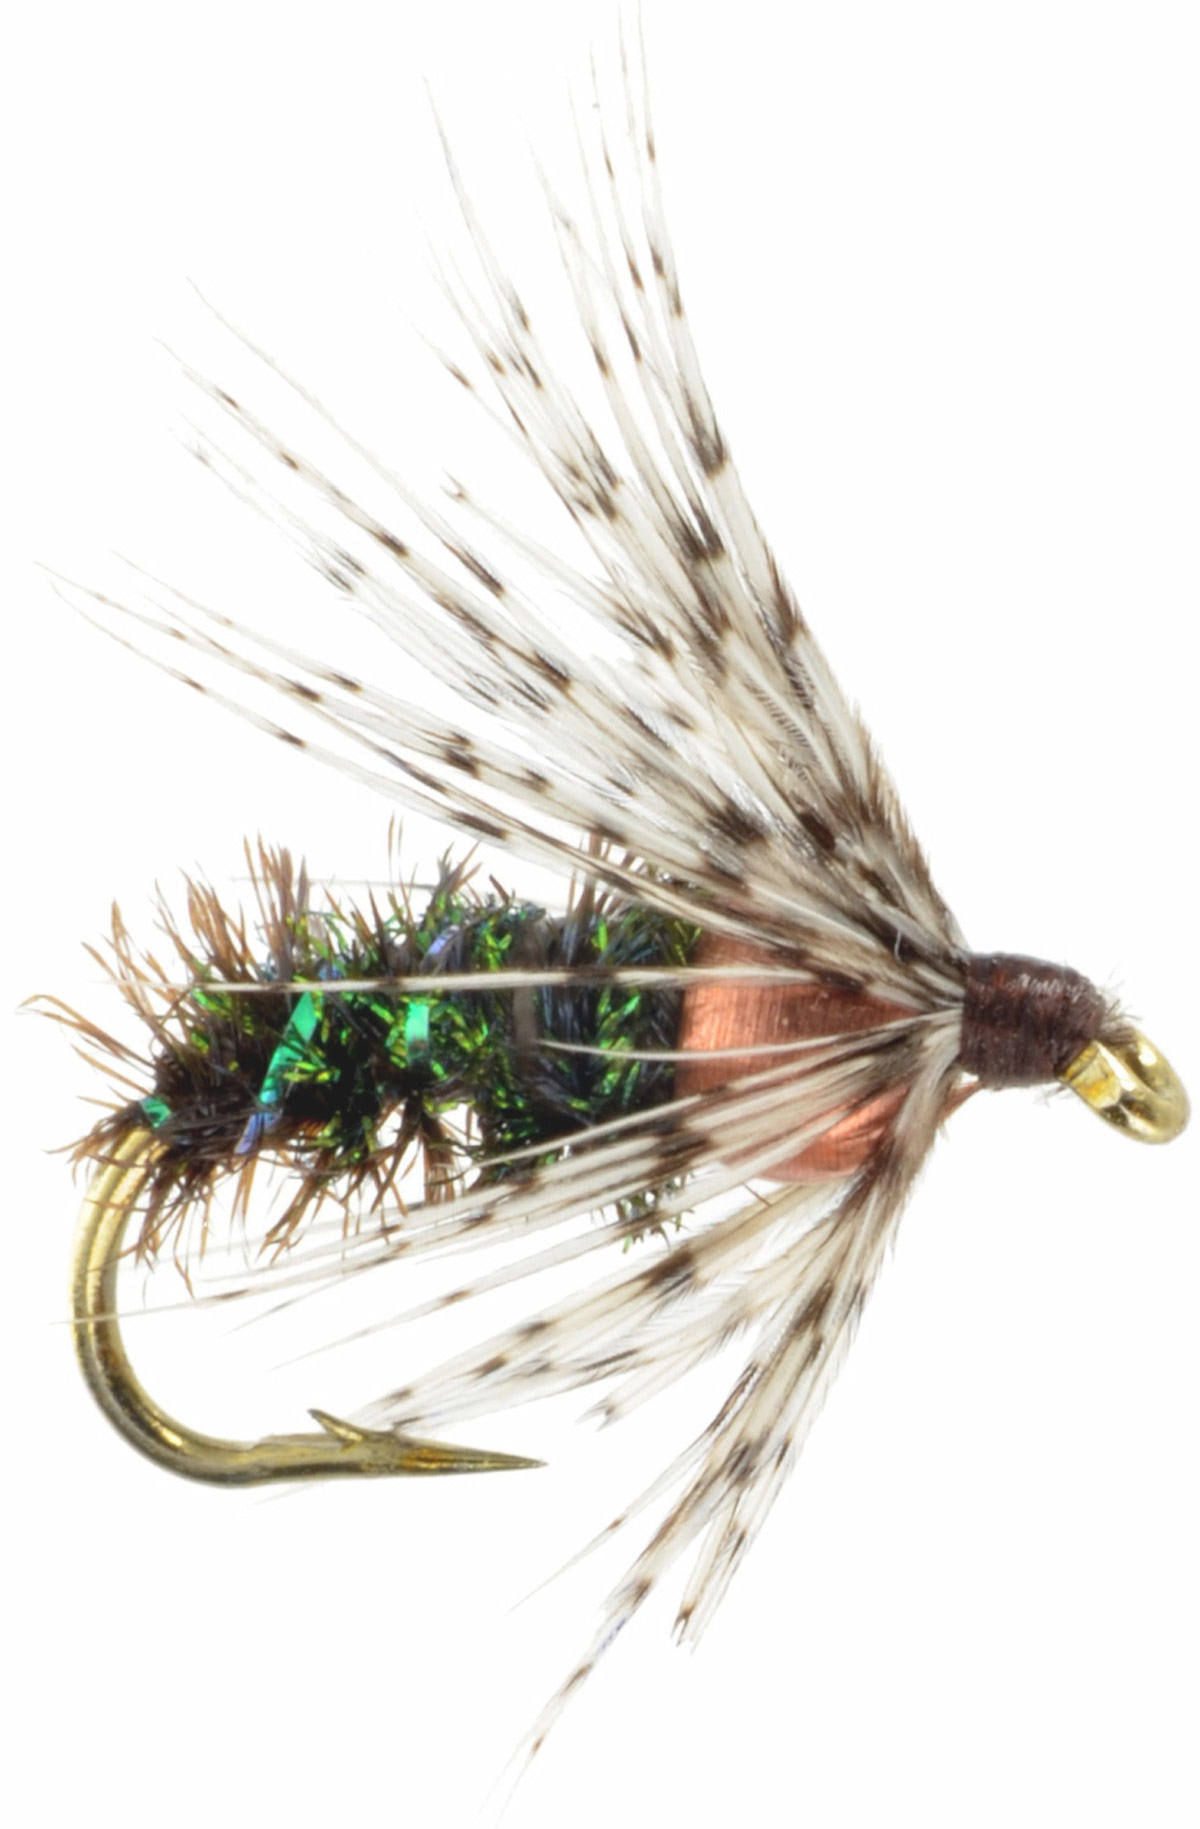 Soft Hackle - Beadhead Peacock, Fly Fishing Flies For Less